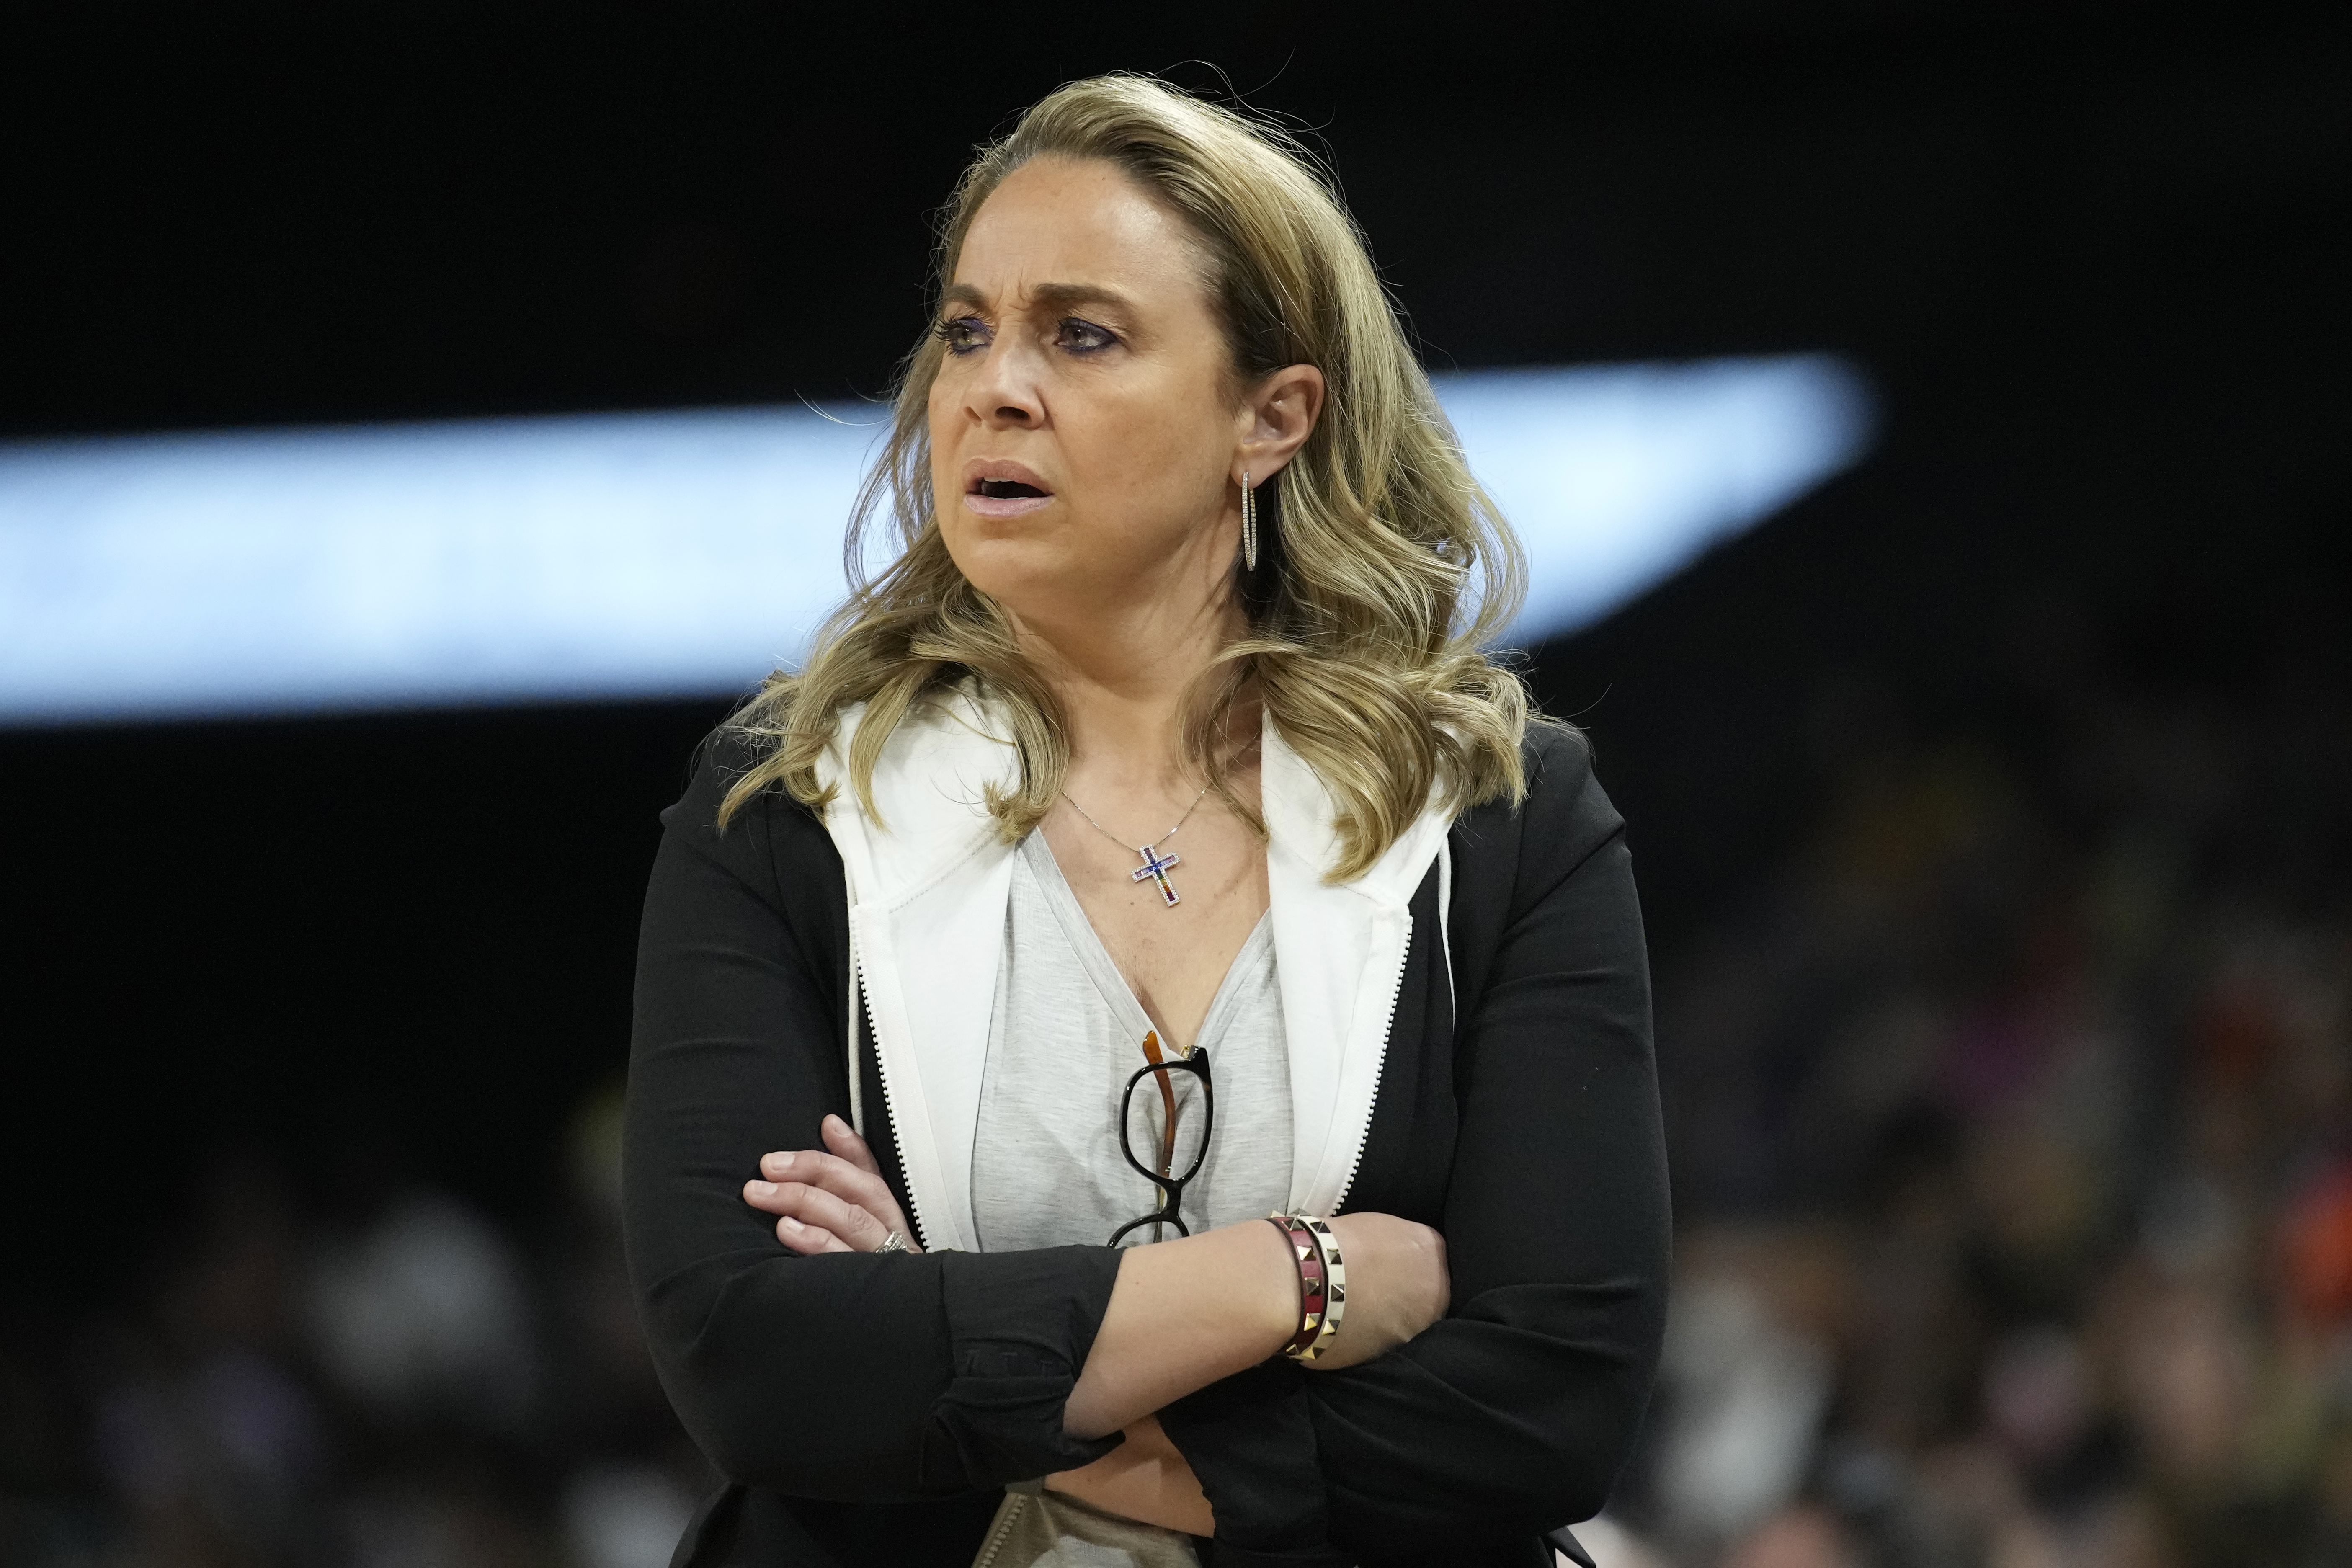 The Las Vegas Aces will retire Becky Hammon's No. 25 jersey - Pounding The  Rock